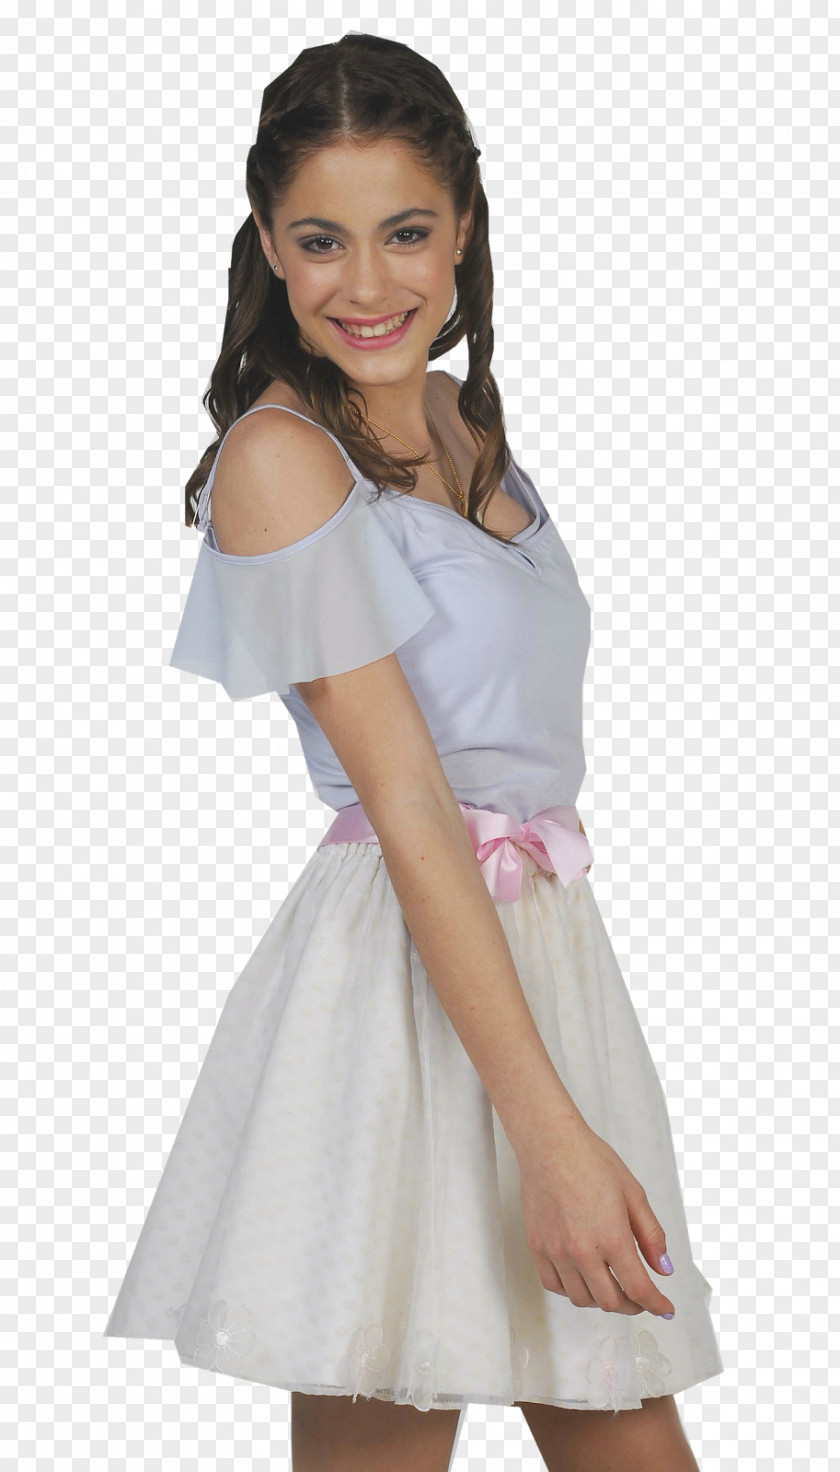 Look Martina Stoessel Violetta PhotoScape Photography PNG